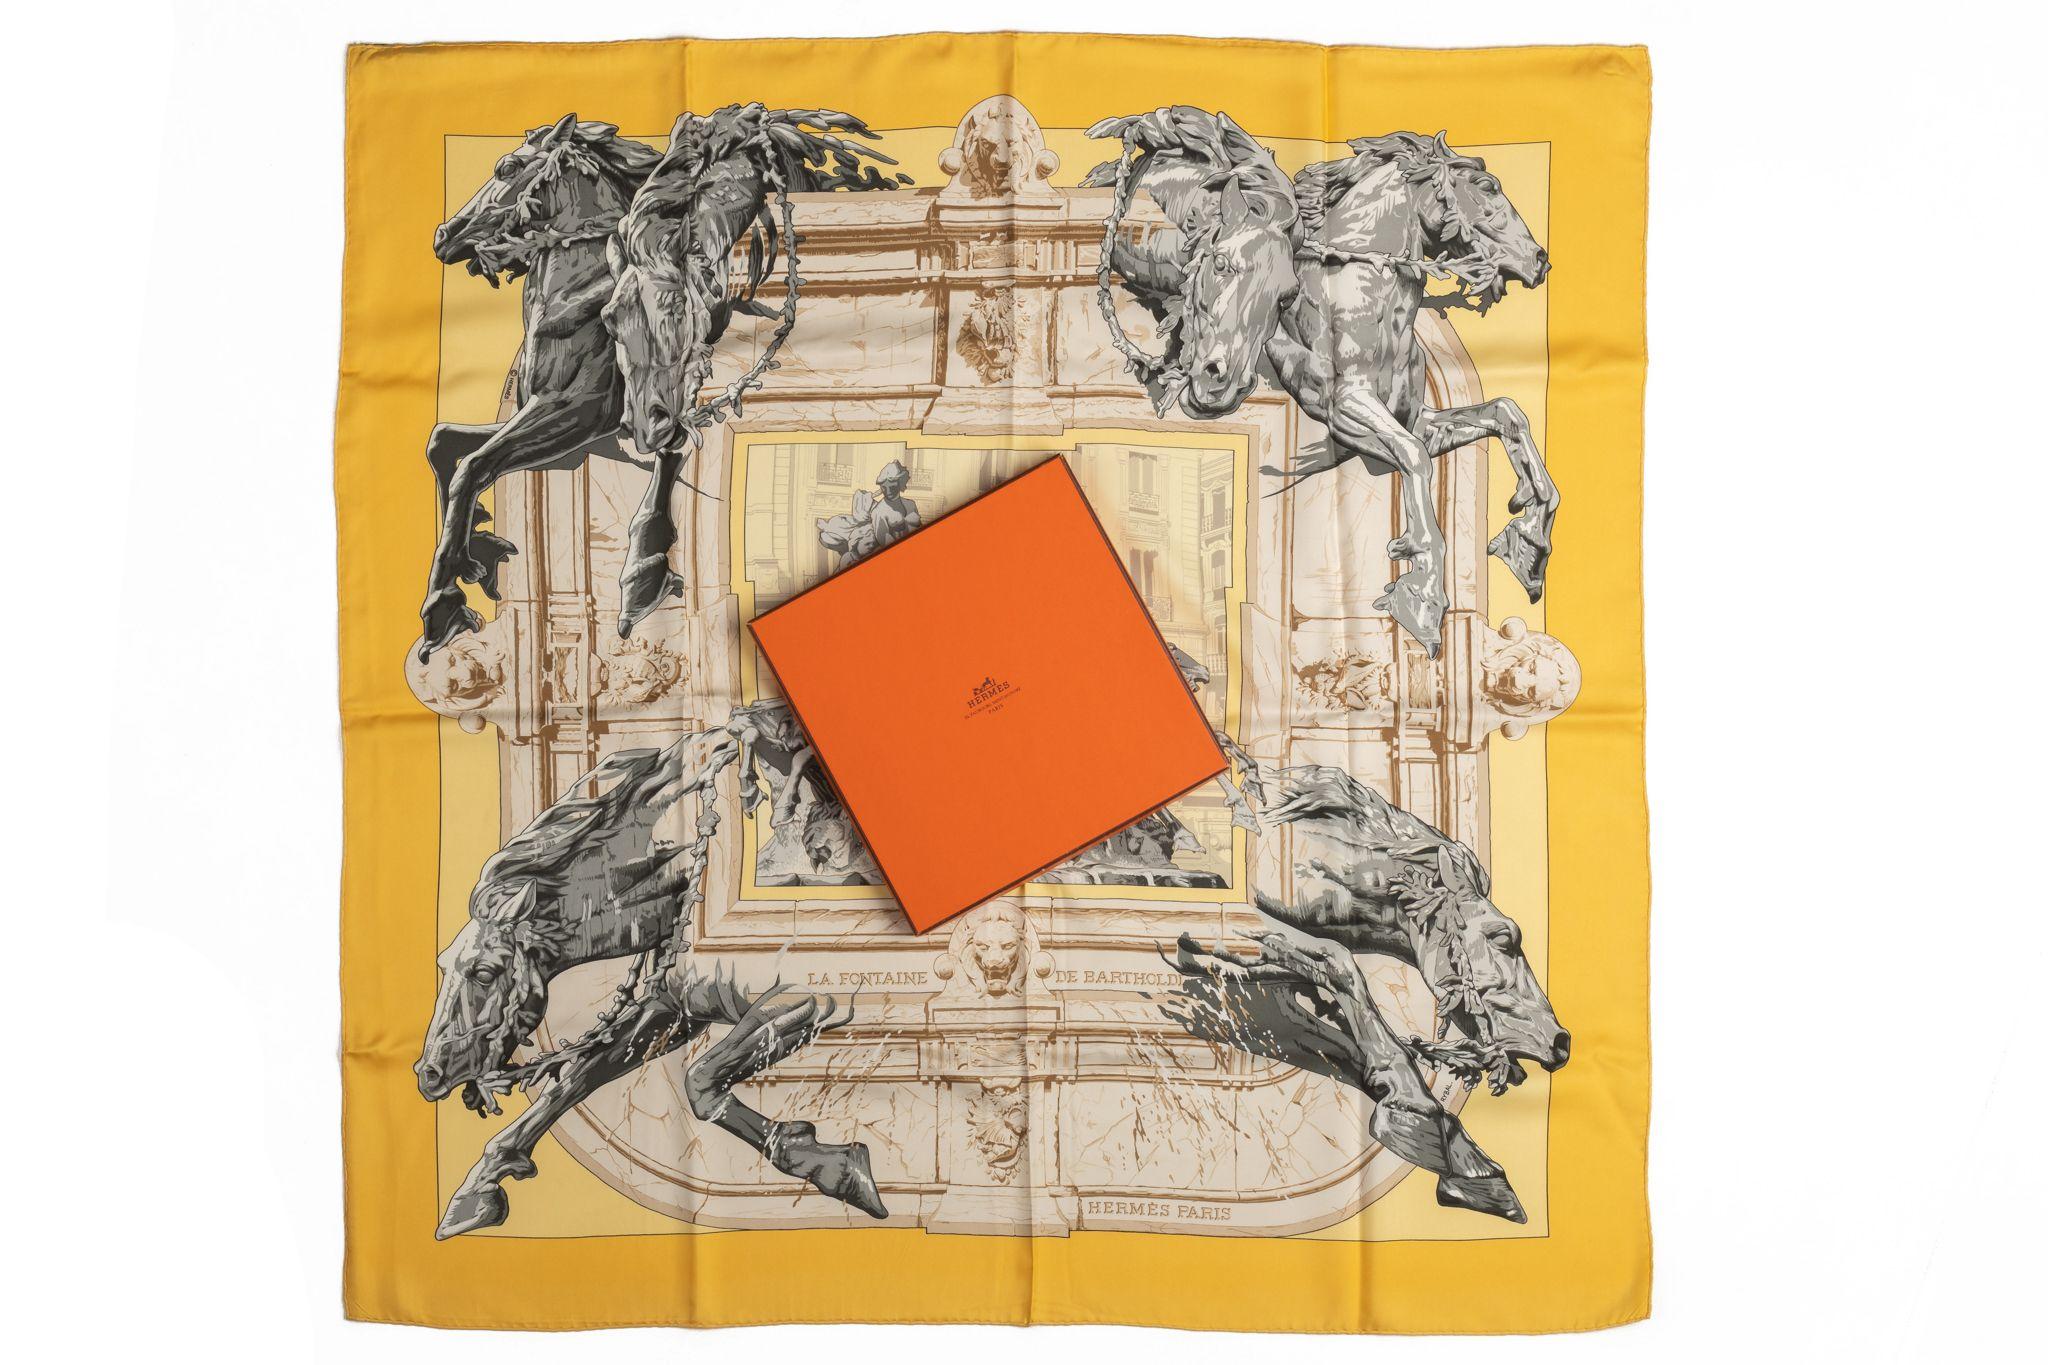 Hermès La Fontaine Silk Scarf With Box In Excellent Condition For Sale In West Hollywood, CA